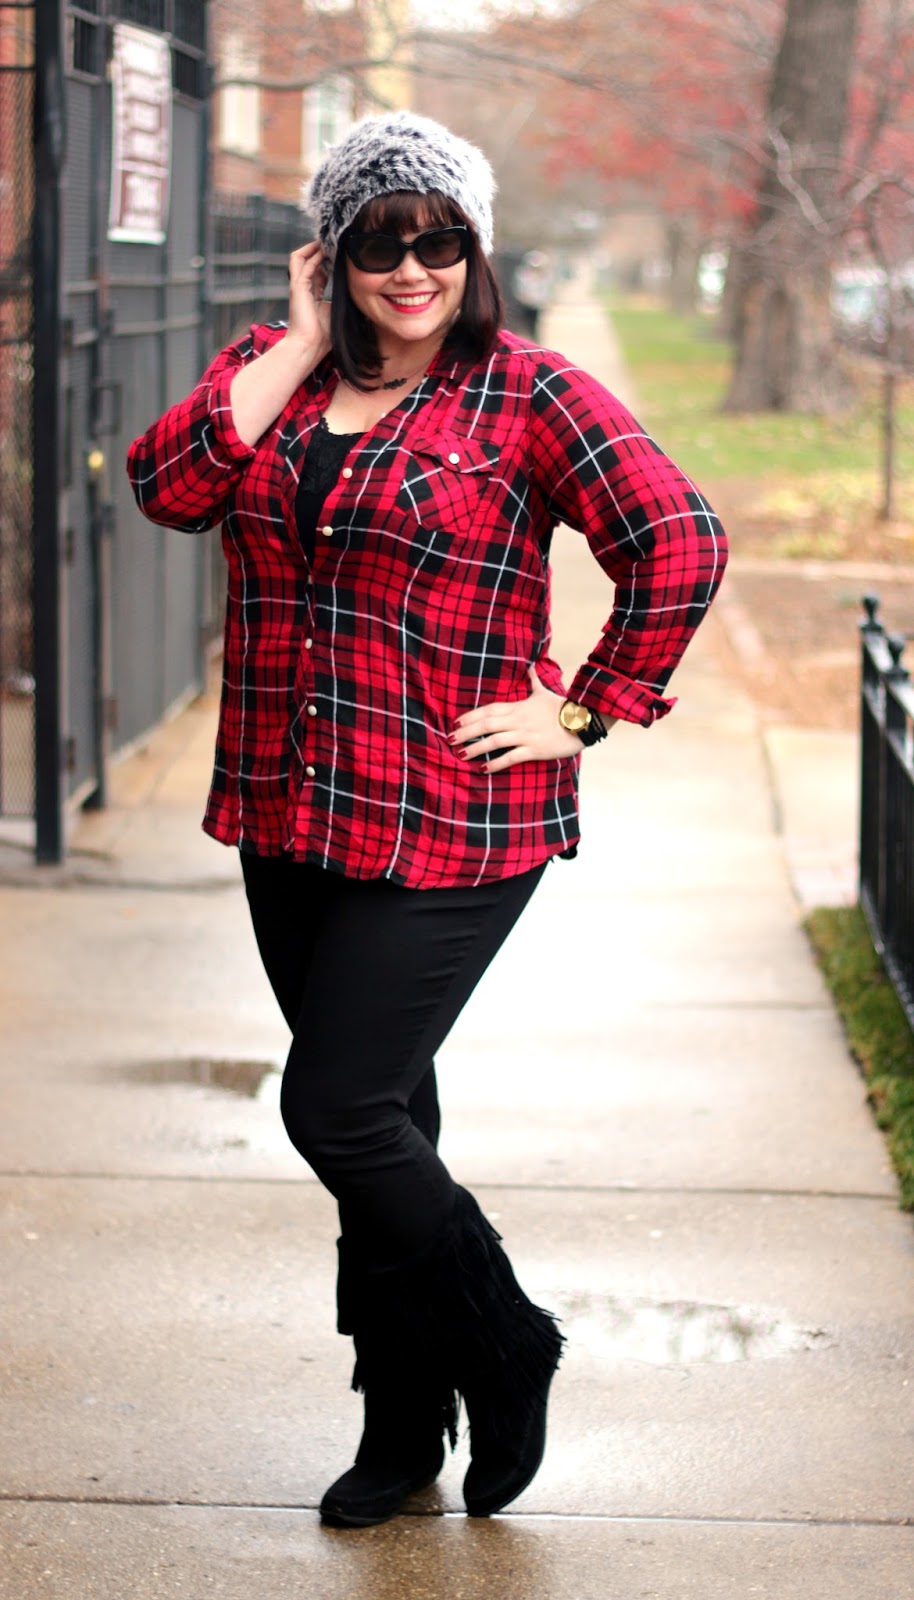 fullbeauty Official Site - Shop Plus Size Clothing